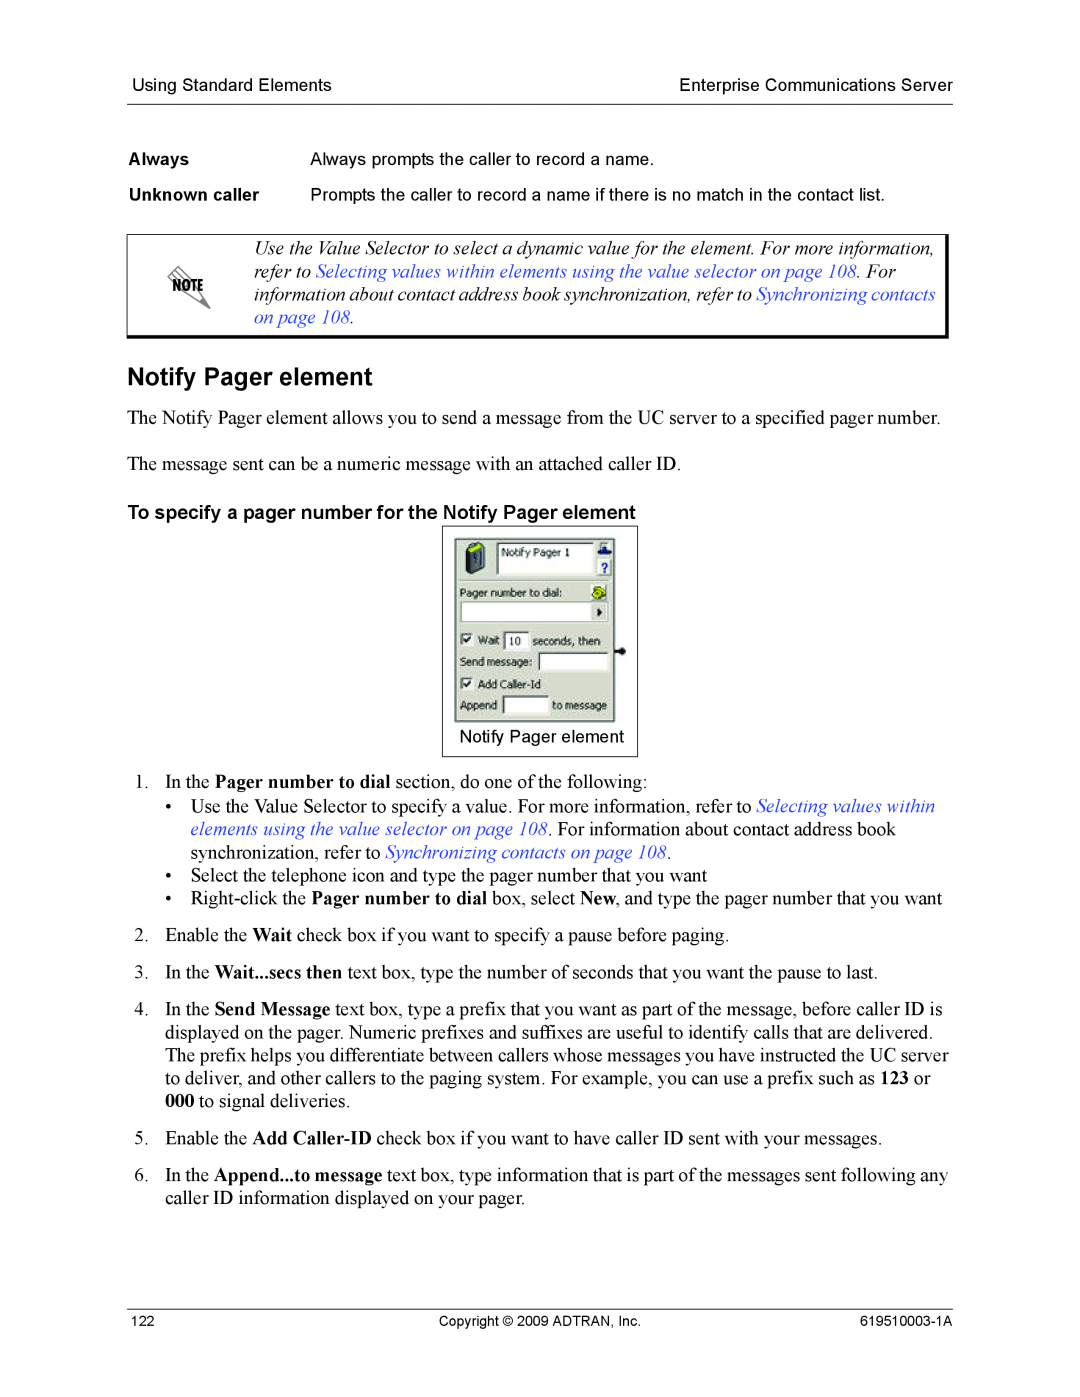 ADTRAN 619510003-1A manual To specify a pager number for the Notify Pager element 